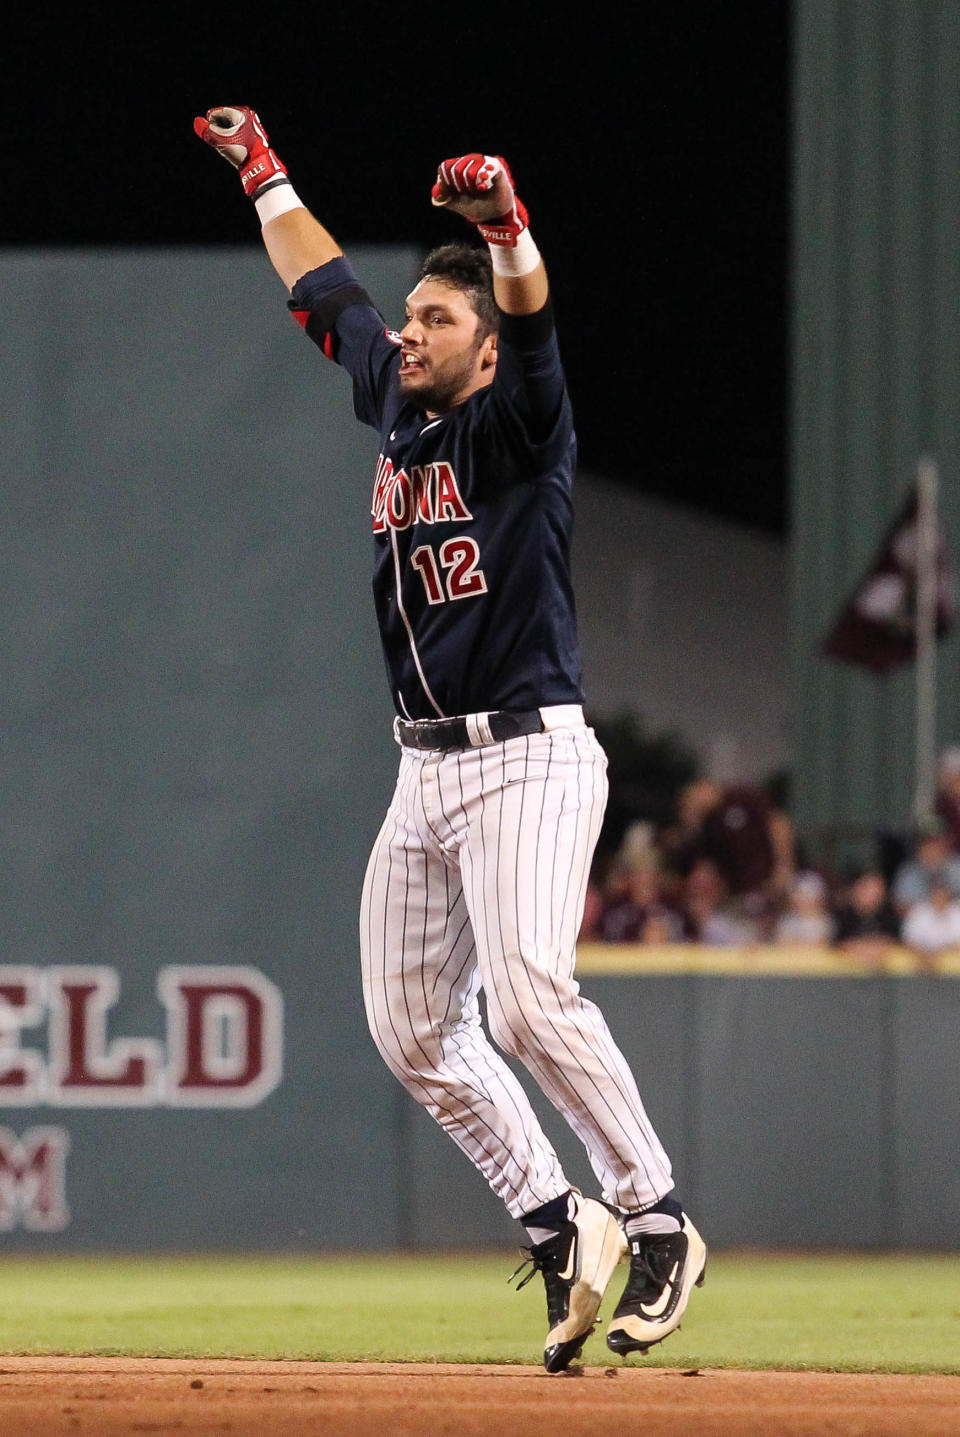 Arizona's Cesar Salazar celebrates his game-winning base hit against Mississippi State during the 11th inning of an NCAA college baseball tournament super regional game in Starkville, Miss., Saturday, June 11, 2016. Arizona won 6-5. (James Pugh/The Laurel Chronicle via AP)